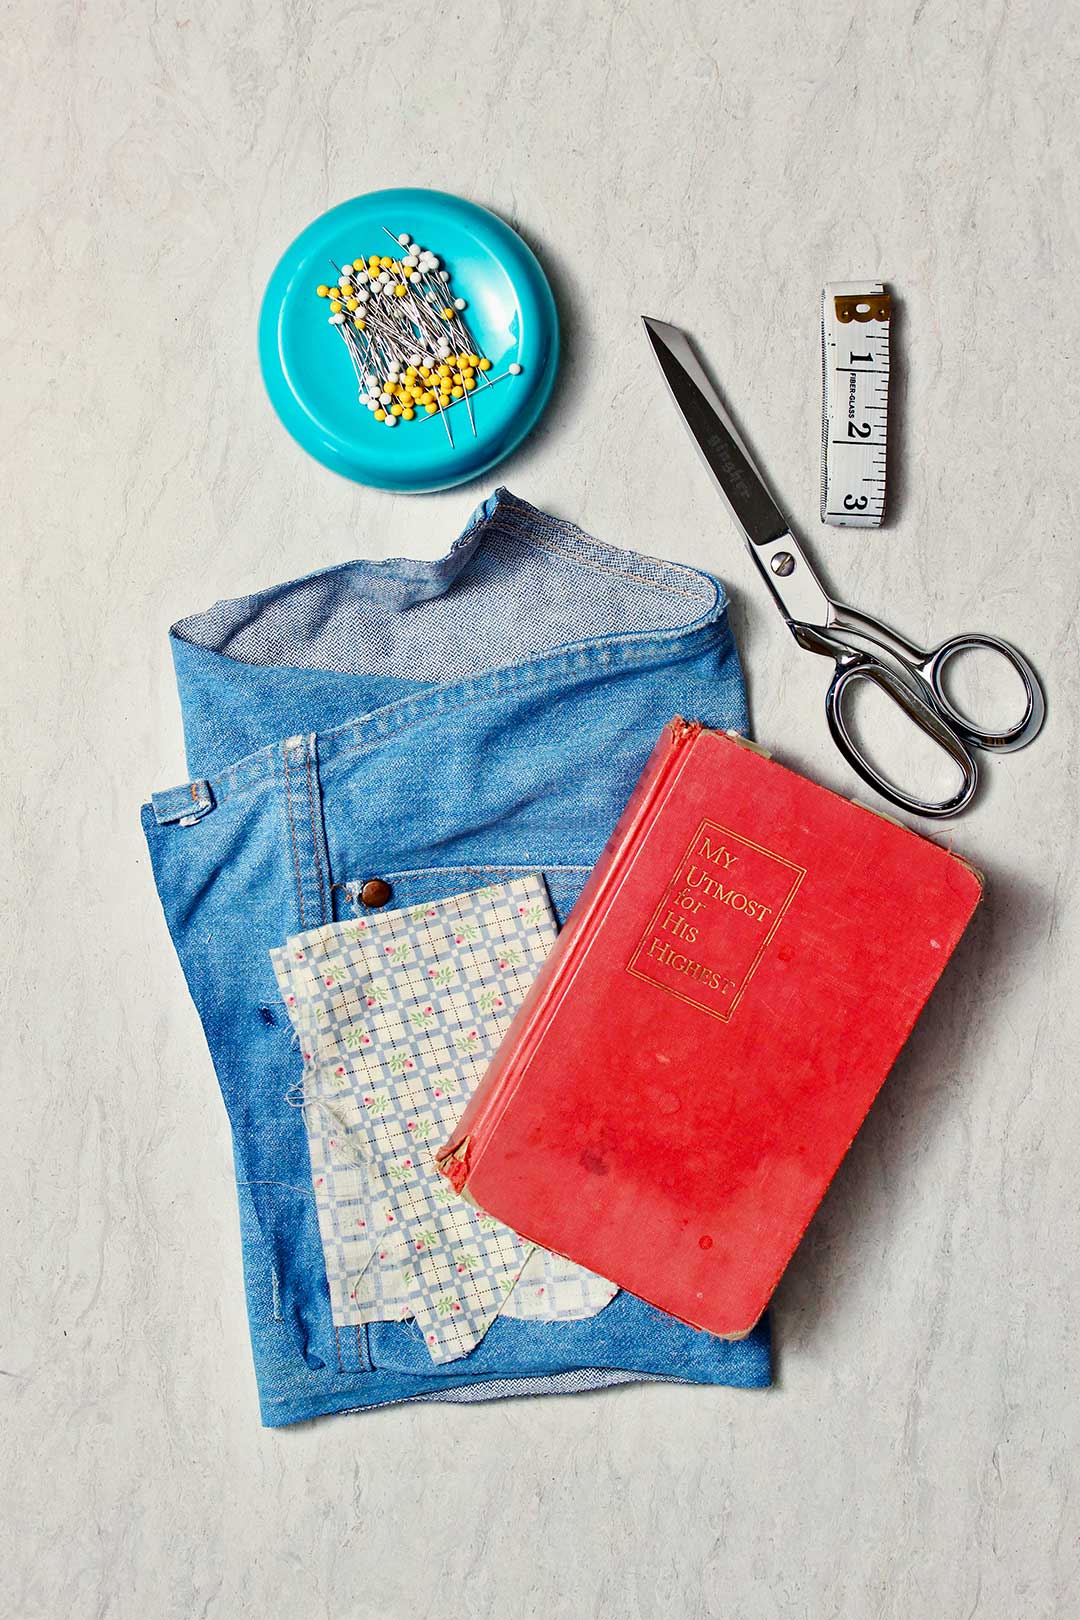 Supplies you will need to make a fabric book cover. Old denim pants scraps, a book, pins, scissors, and a measuring tape.